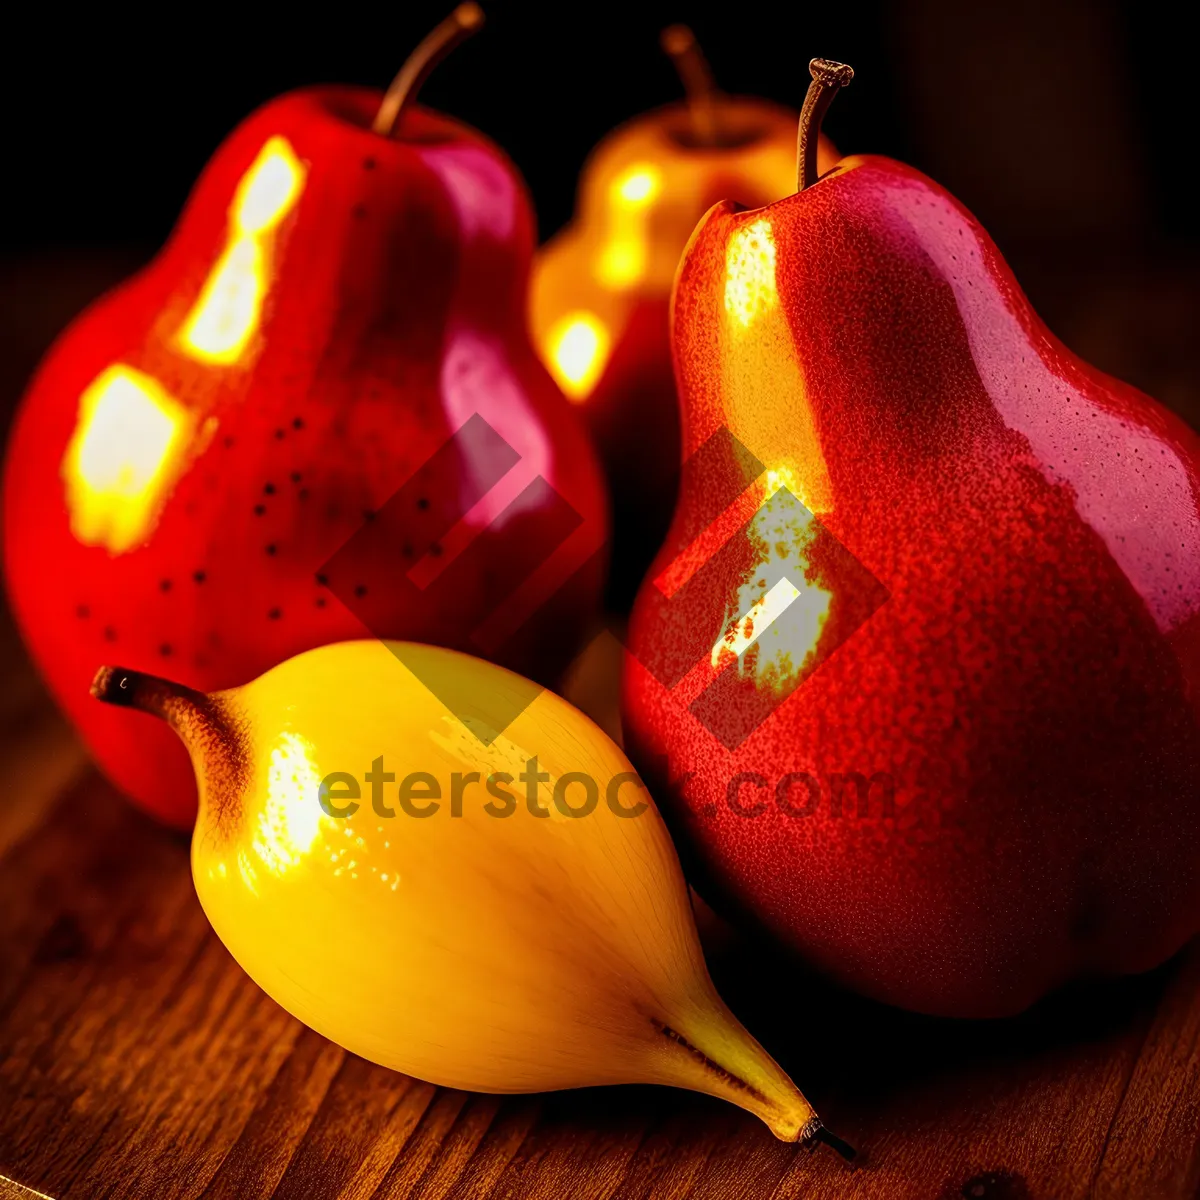 Picture of Juicy Pear - Fresh, Sweet, and Nutritious